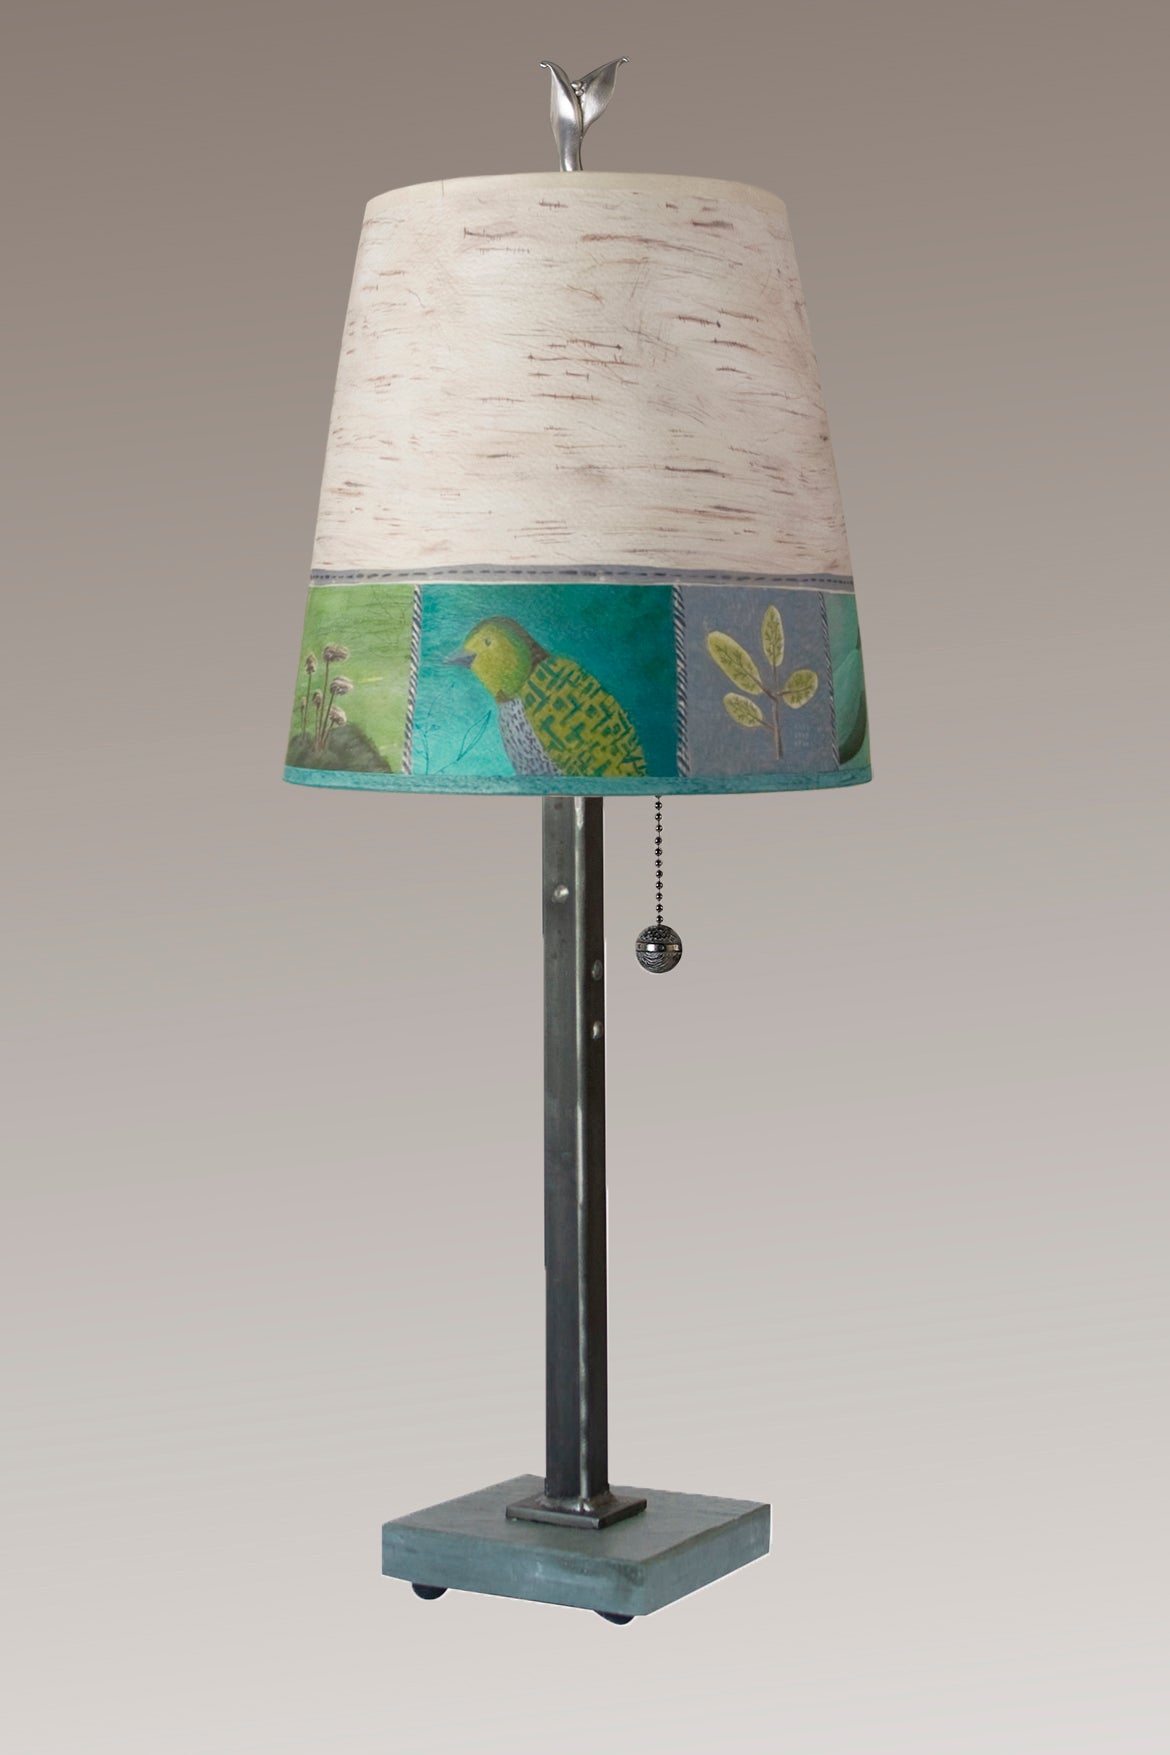 Janna Ugone & Co Table Lamps Steel Table Lamp with Small Drum Shade in Woodland Trails in Birch